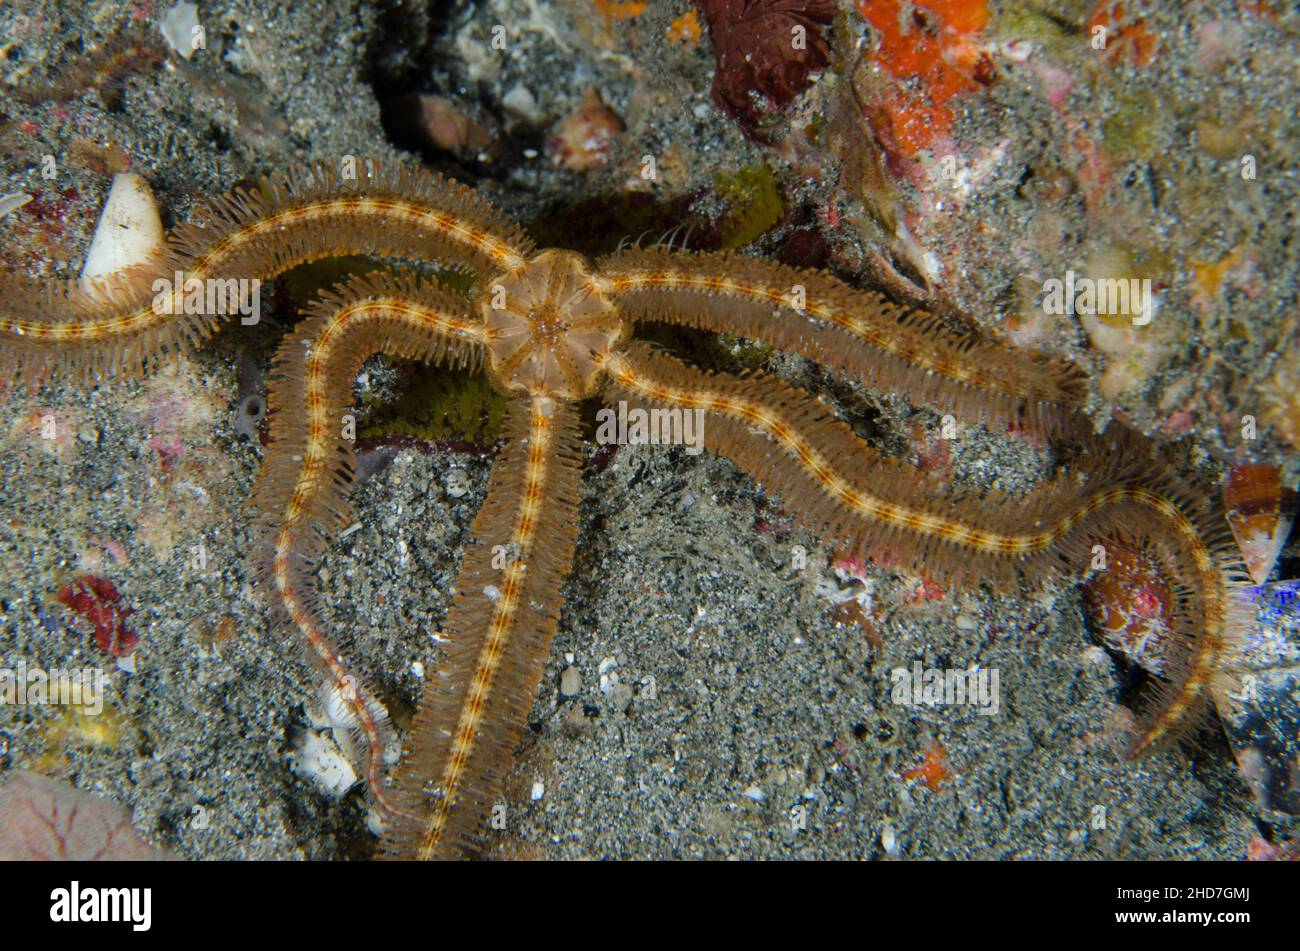 Yellow-lined Brittle Star (Macrophiothrix sp), Jetty dive site, Padang Bai, Bali, Indonesia. Stock Photo